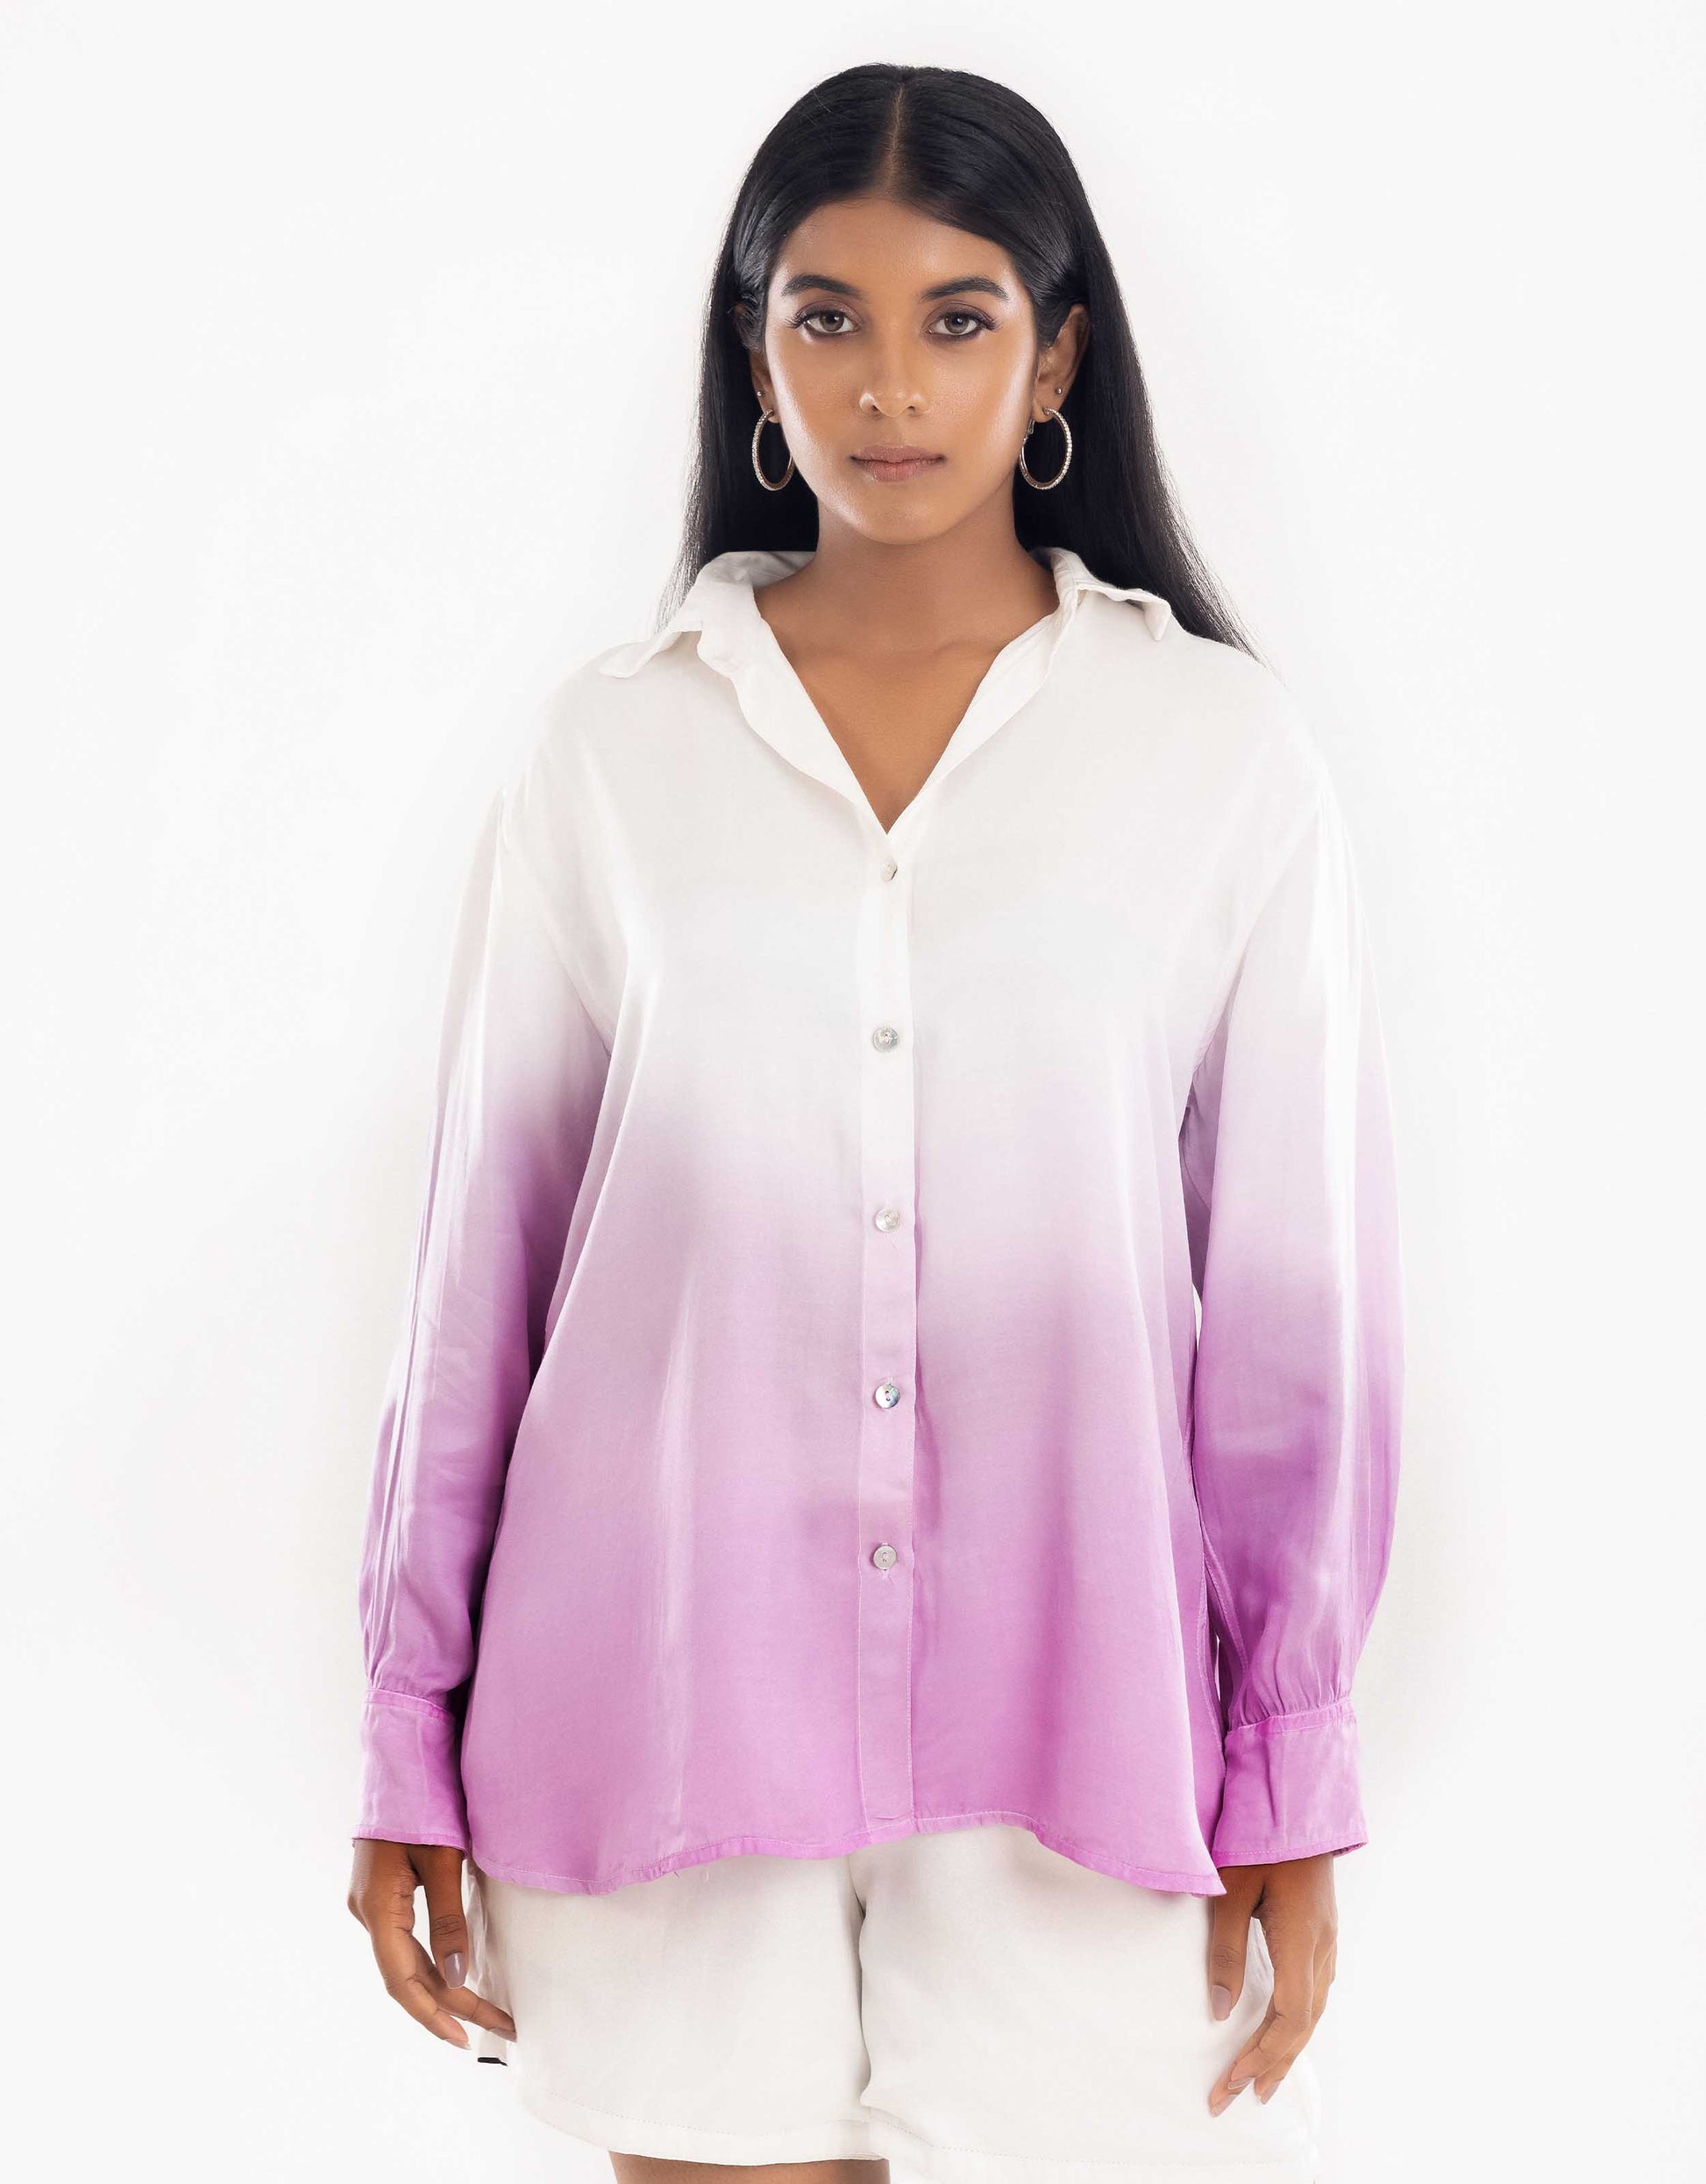 Hueloom lavender convertible ombre oversized shirt front view in regular shirt style.